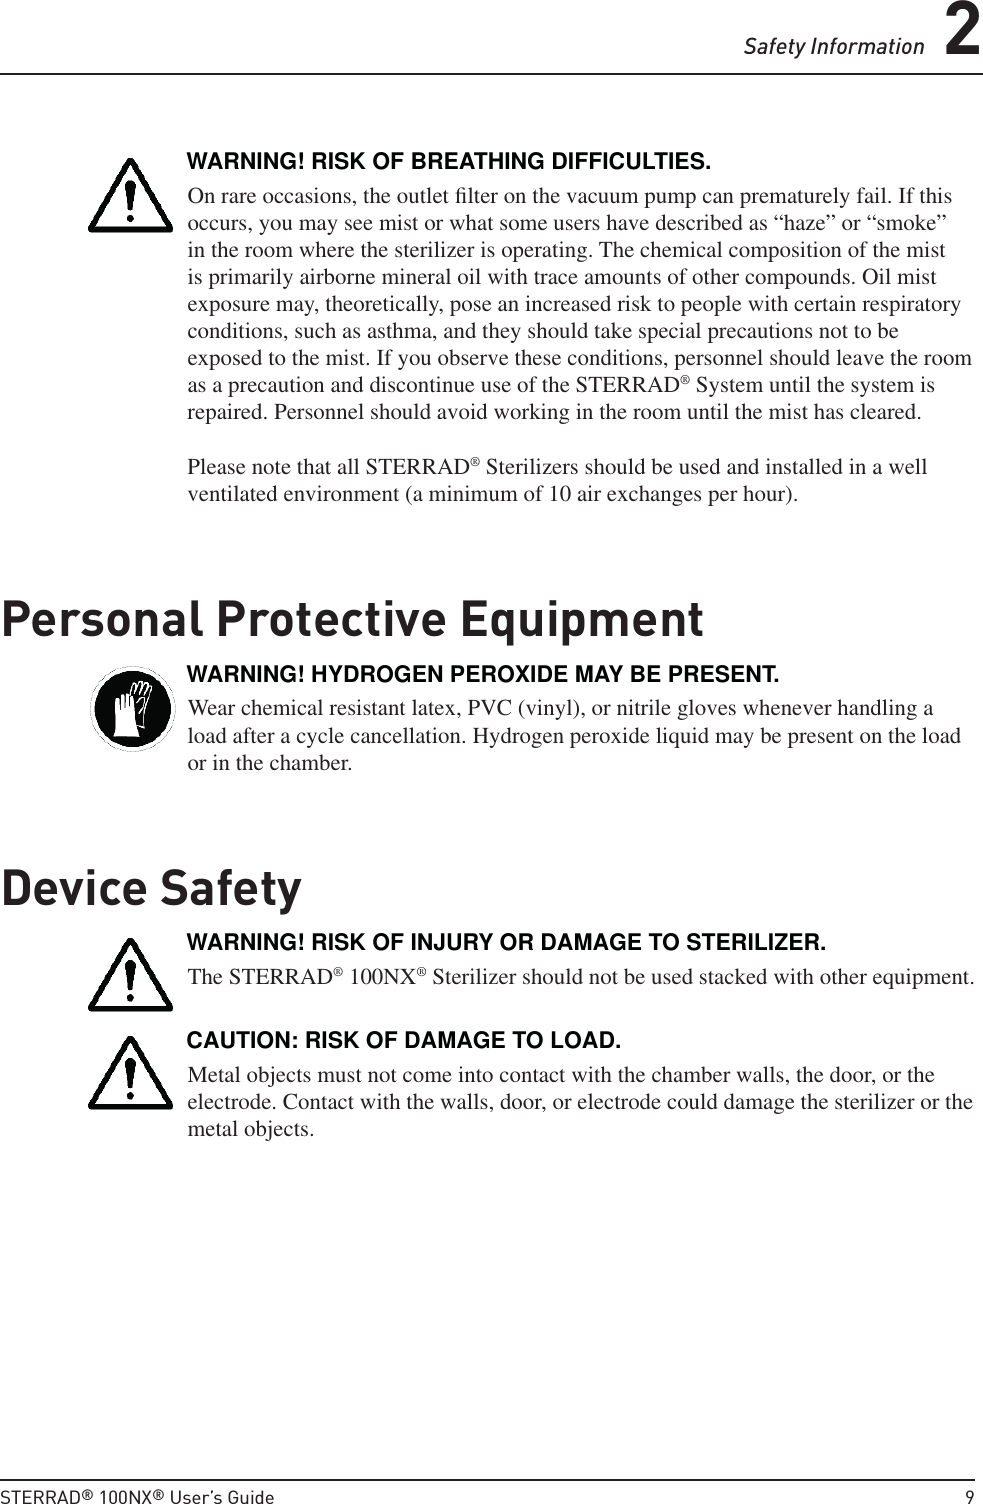 Safety Information 2STERRAD® 100NX® User’s Guide  9WARNING! RISK OF BREATHING DIFFICULTIES.On rare occasions, the outlet ﬁ lter on the vacuum pump can prematurely fail. If this occurs, you may see mist or what some users have described as “haze” or “smoke” in the room where the sterilizer is operating. The chemical composition of the mist is primarily airborne mineral oil with trace amounts of other compounds. Oil mist exposure may, theoretically, pose an increased risk to people with certain respiratory conditions, such as asthma, and they should take special precautions not to be exposed to the mist. If you observe these conditions, personnel should leave the room as a precaution and discontinue use of the STERRAD® System until the system is repaired. Personnel should avoid working in the room until the mist has cleared.Please note that all STERRAD® Sterilizers should be used and installed in a well ventilated environment (a minimum of 10 air exchanges per hour).Personal Protective EquipmentWARNING! HYDROGEN PEROXIDE MAY BE PRESENT.Wear chemical resistant latex, PVC (vinyl), or nitrile gloves whenever handling a load after a cycle cancellation. Hydrogen peroxide liquid may be present on the load or in the chamber.Device SafetyWARNING! RISK OF INJURY OR DAMAGE TO STERILIZER.The STERRAD® 100NX® Sterilizer should not be used stacked with other equipment.CAUTION: RISK OF DAMAGE TO LOAD.Metal objects must not come into contact with the chamber walls, the door, or the electrode. Contact with the walls, door, or electrode could damage the sterilizer or the metal objects.